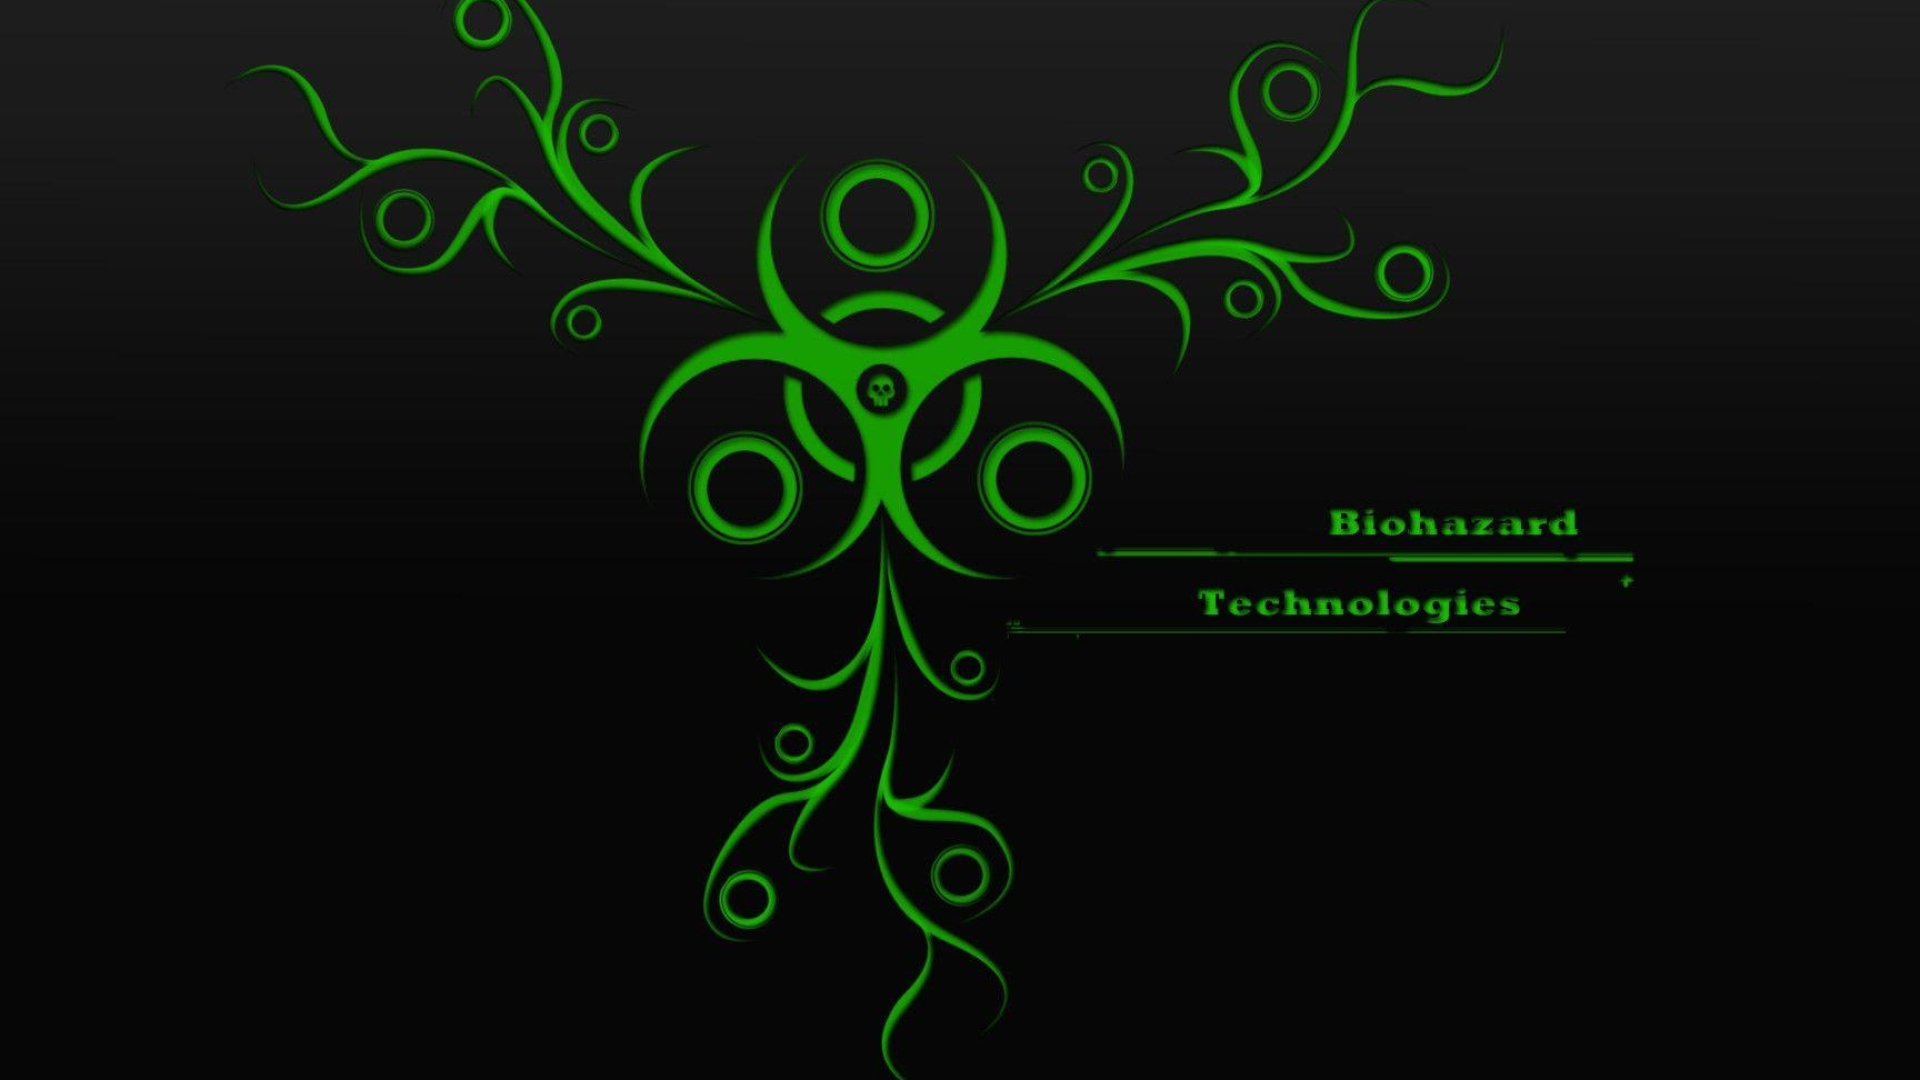 Green Biohazard: Biological hazard technologies, A sample of a microorganism, virus or toxin that can adversely affect human health. 1920x1080 Full HD Background.